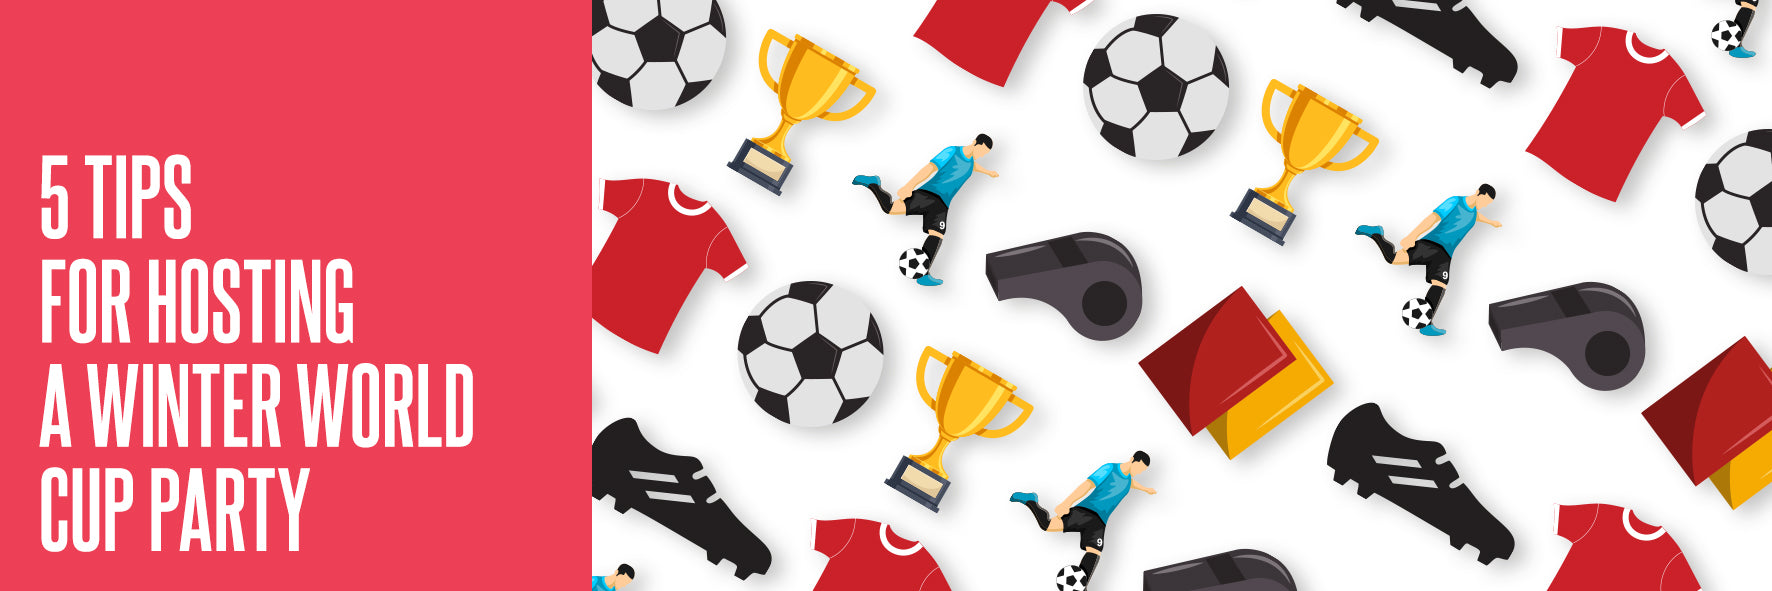 5 Tips for Hosting A Winter World Cup Party